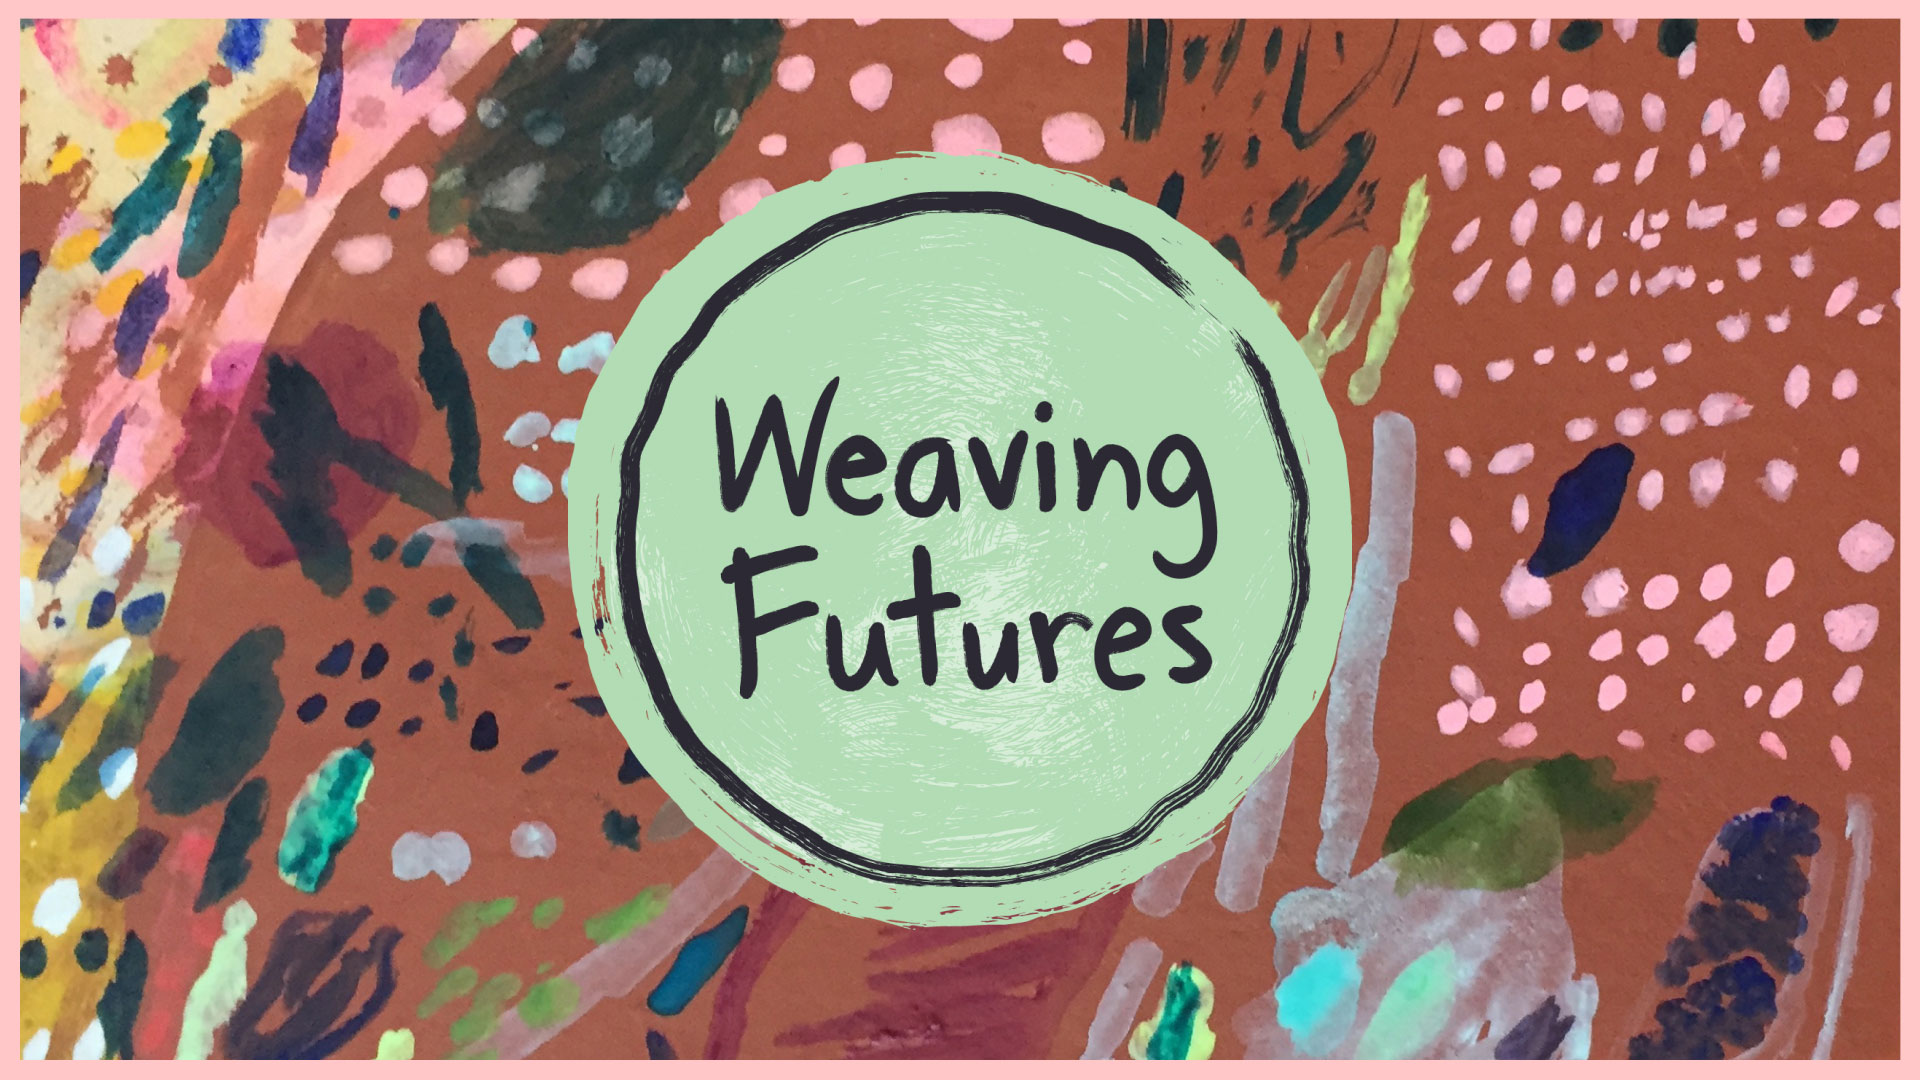 Weaving Futures logo on painted background